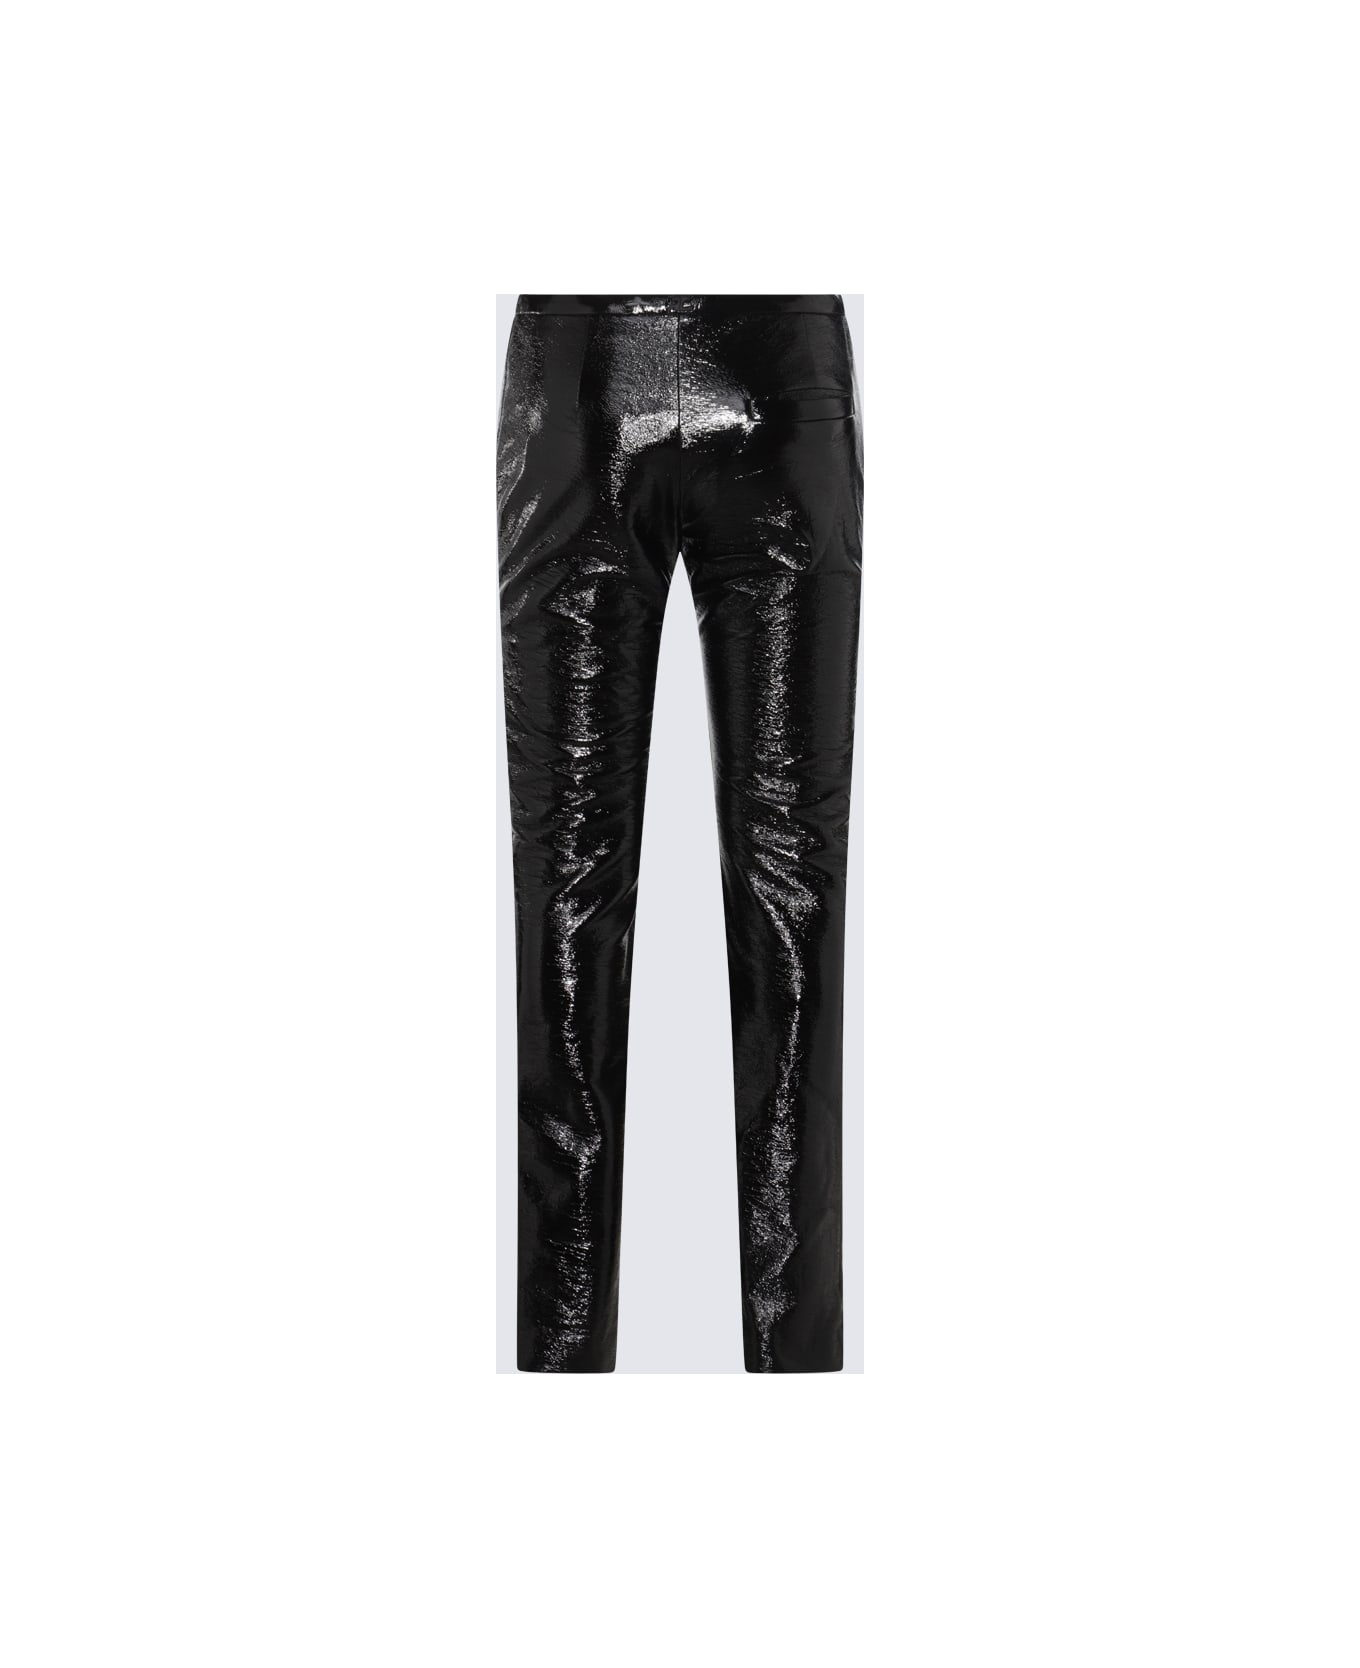 Courrèges Black Vynil Pants ボトムス